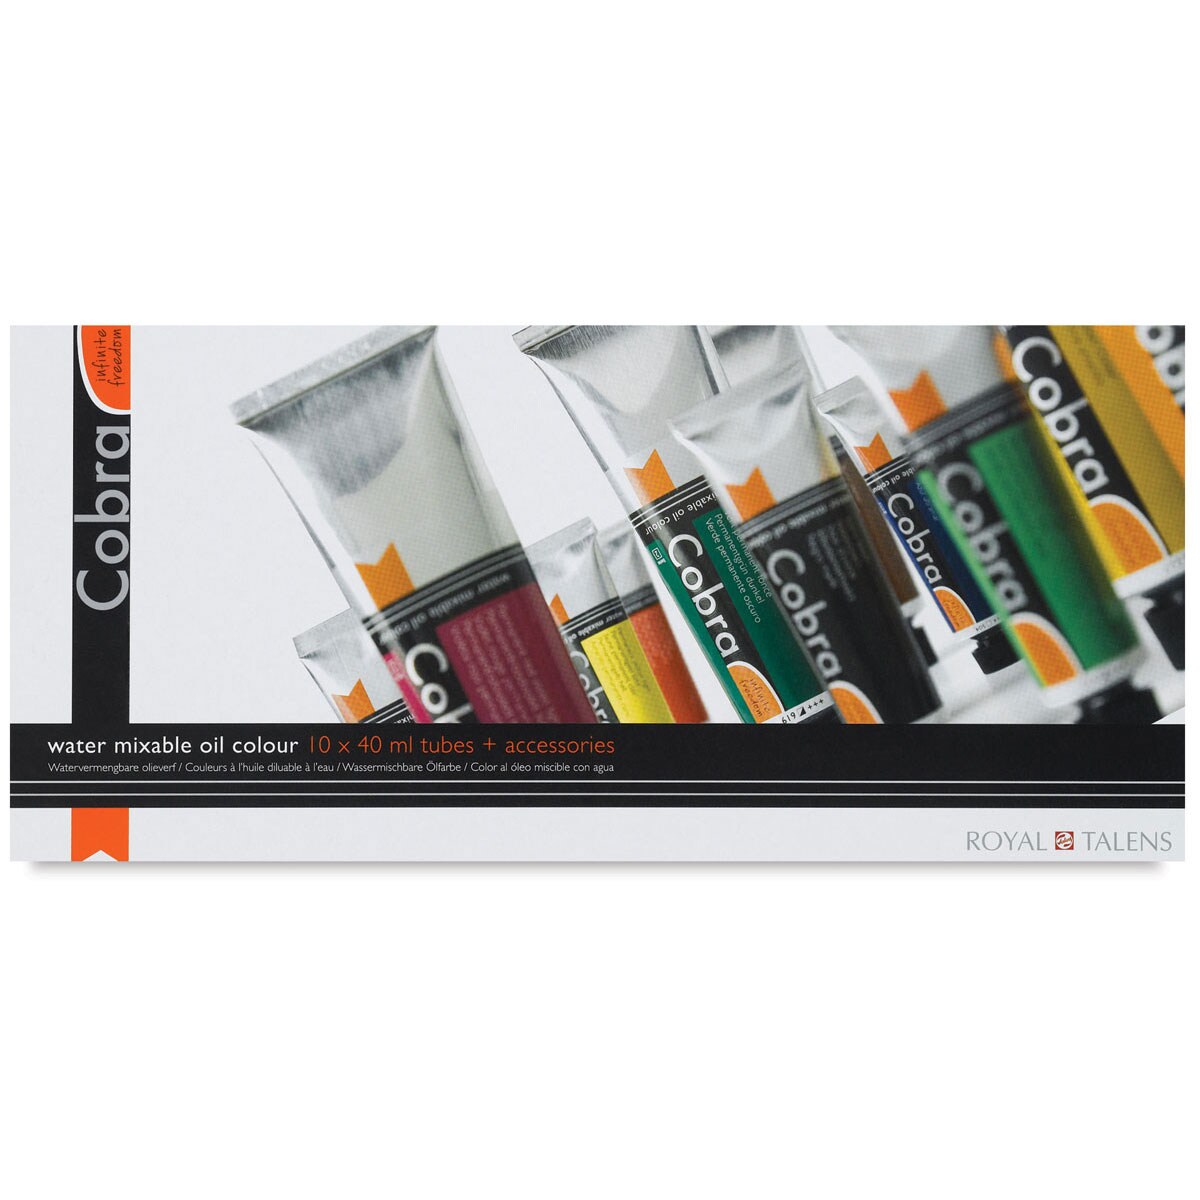 Talens Cobra Water Mixable Oil Paint 40ml 